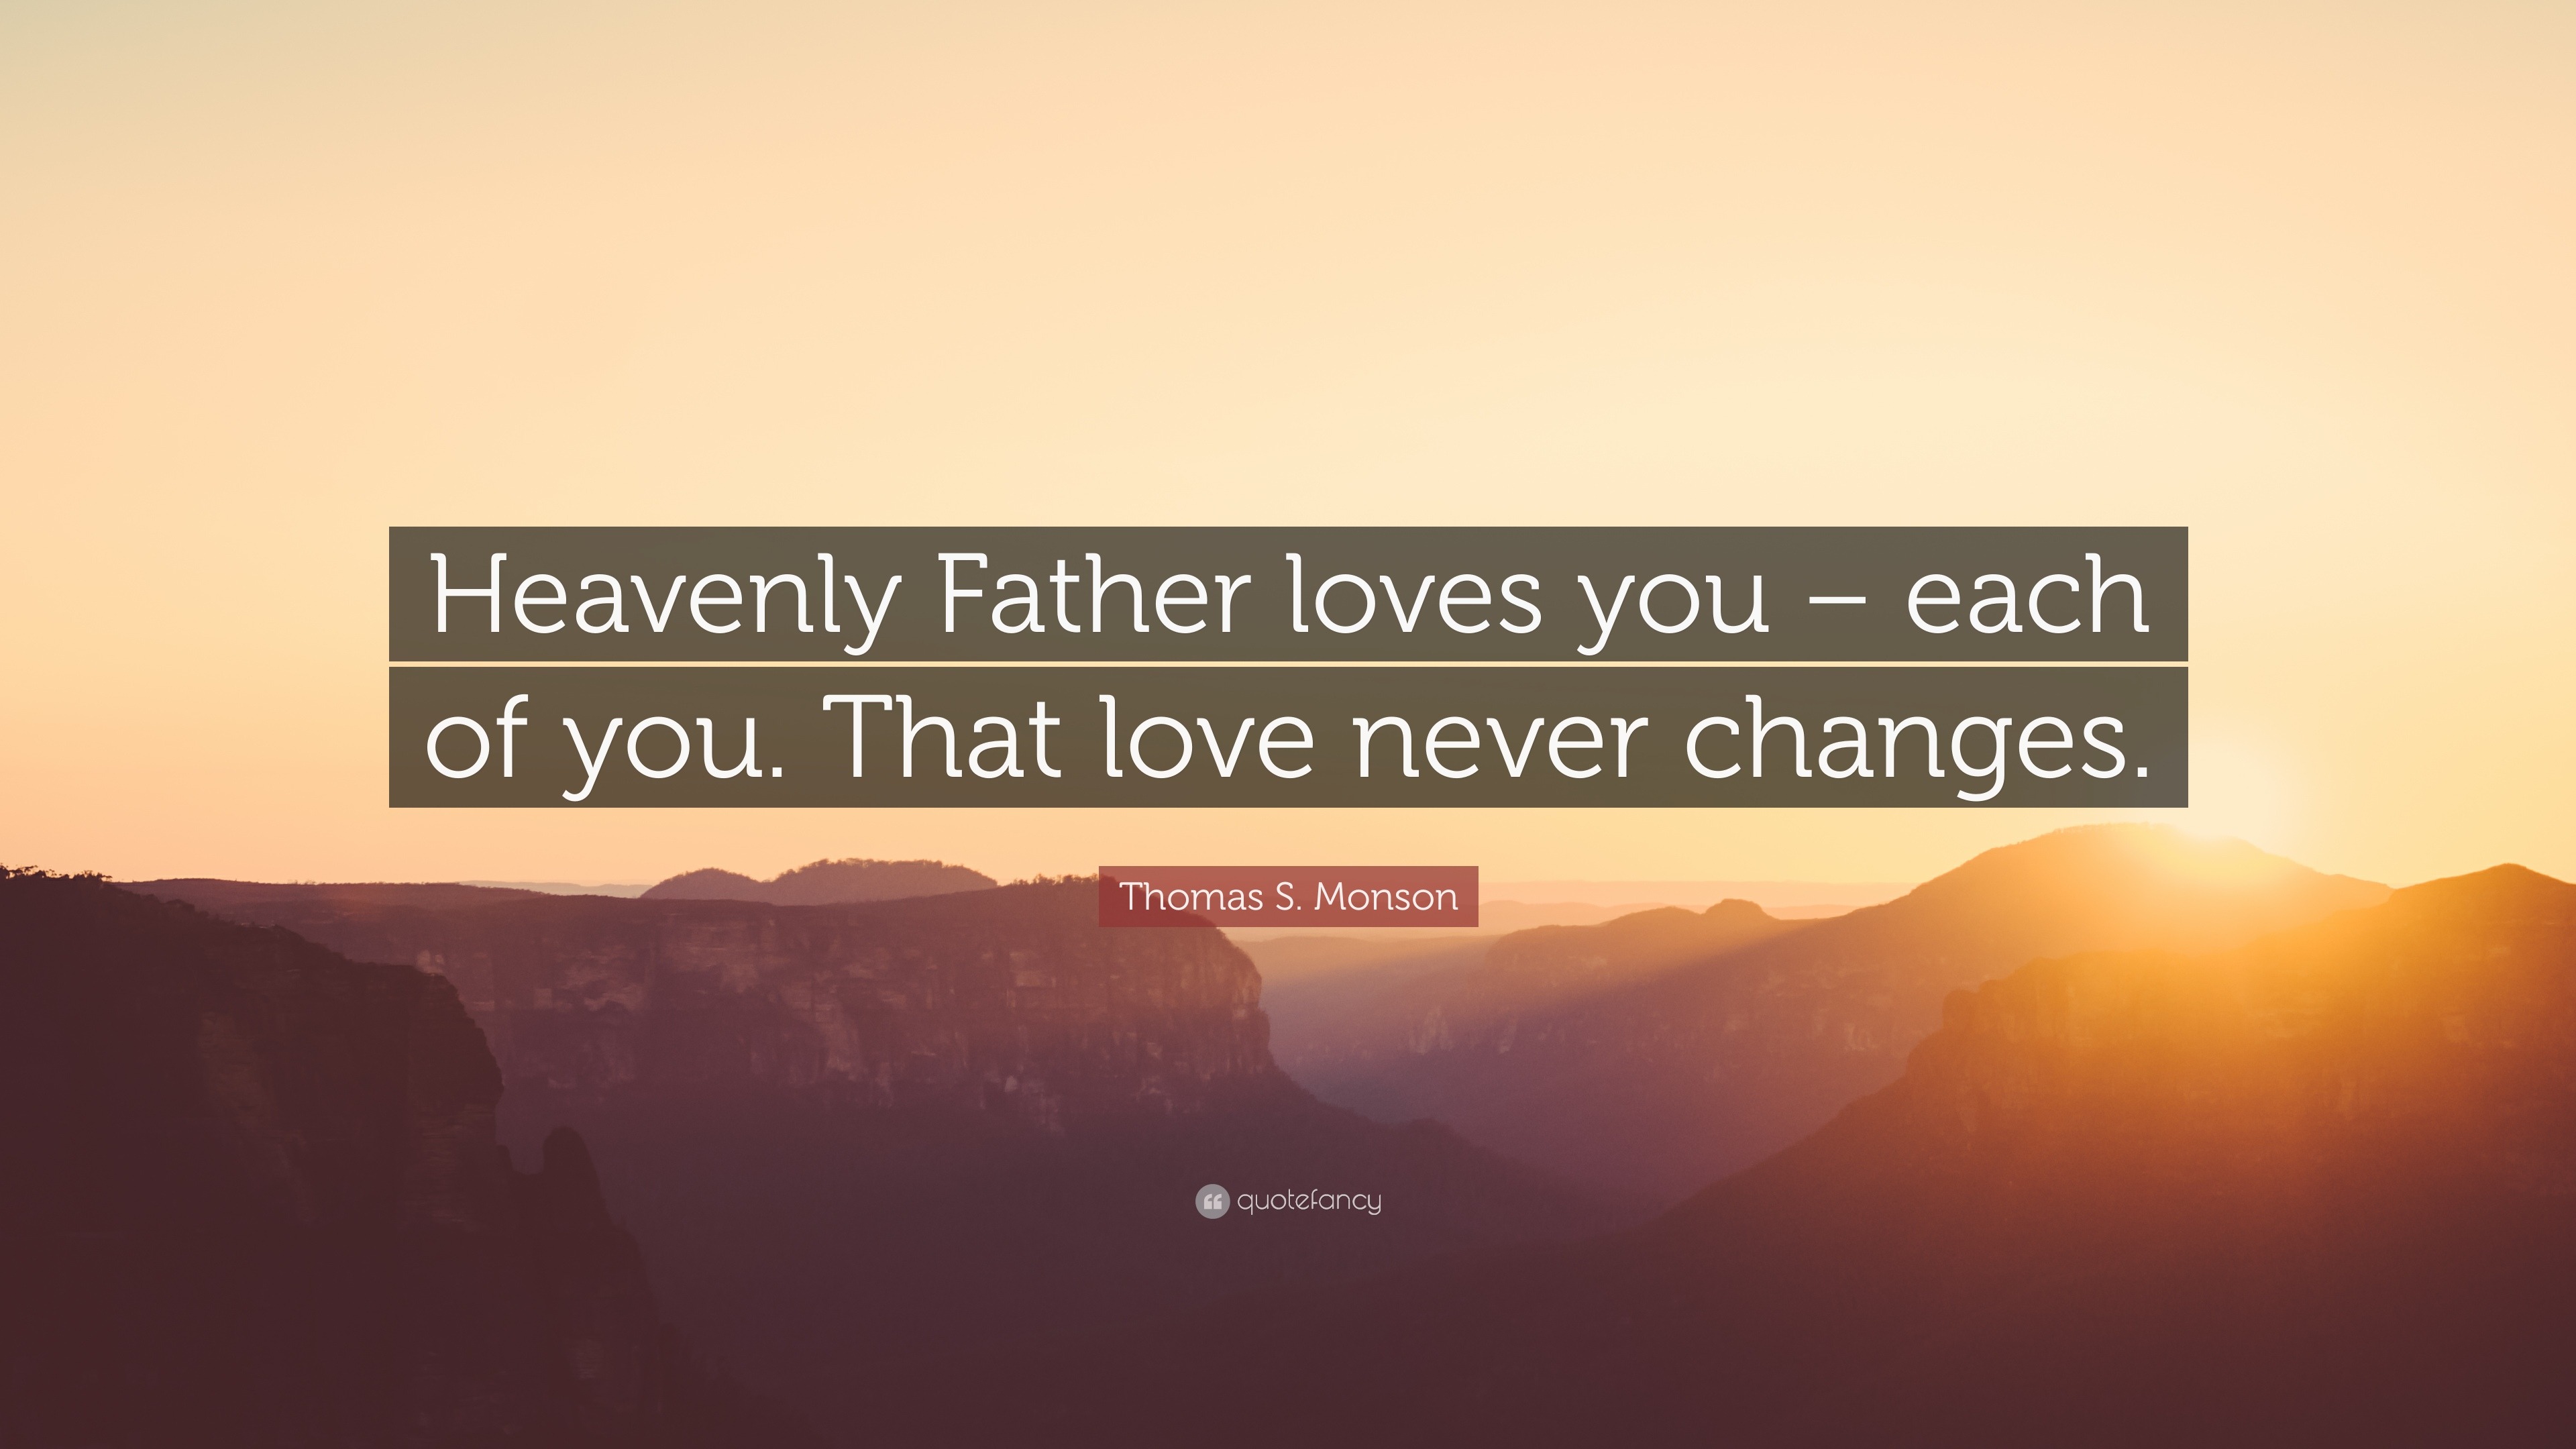 Thomas S Monson Quote “Heavenly Father loves you – each of you